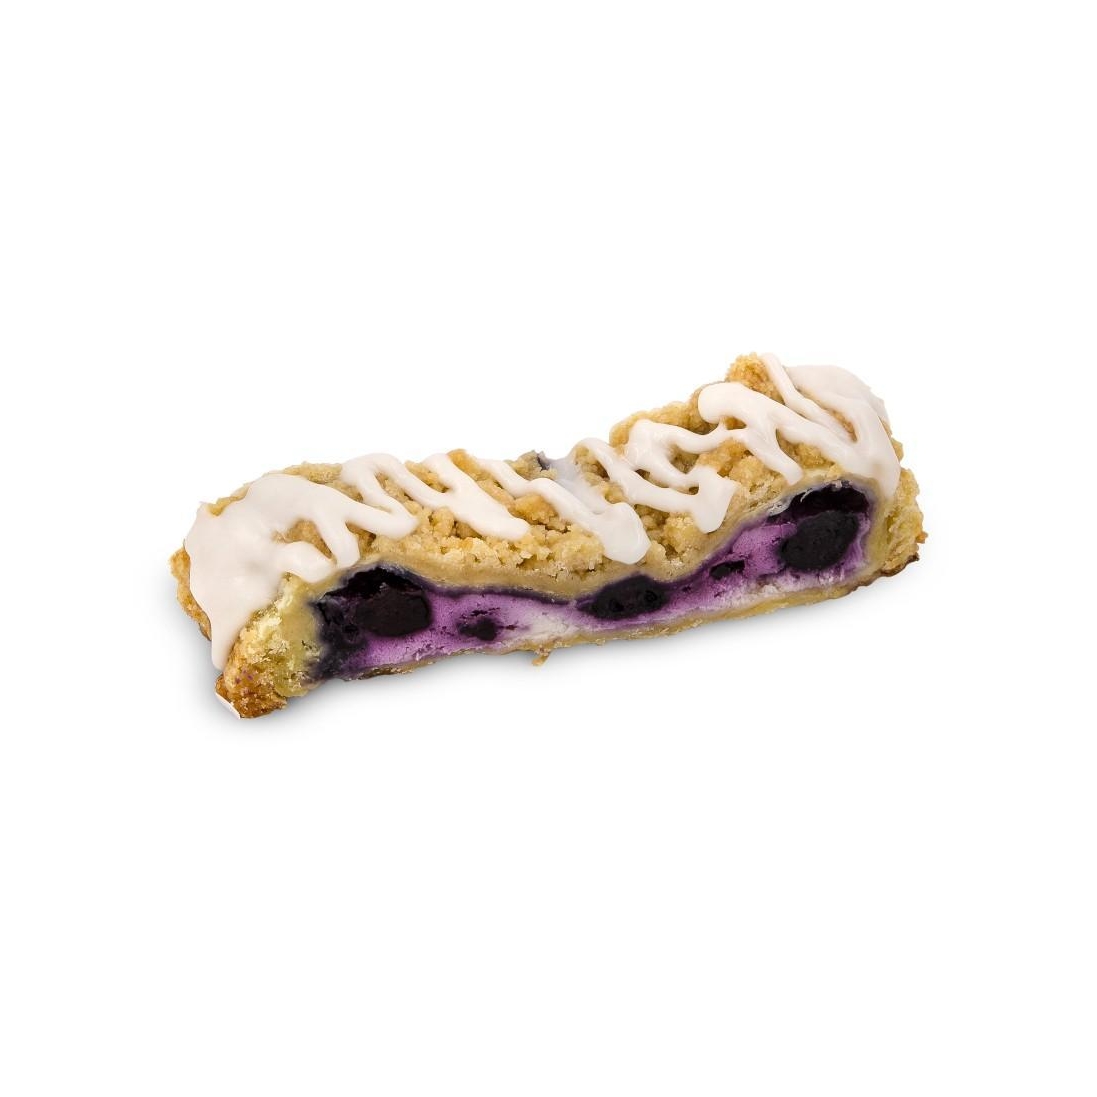 Blueberry Cheese Strudel